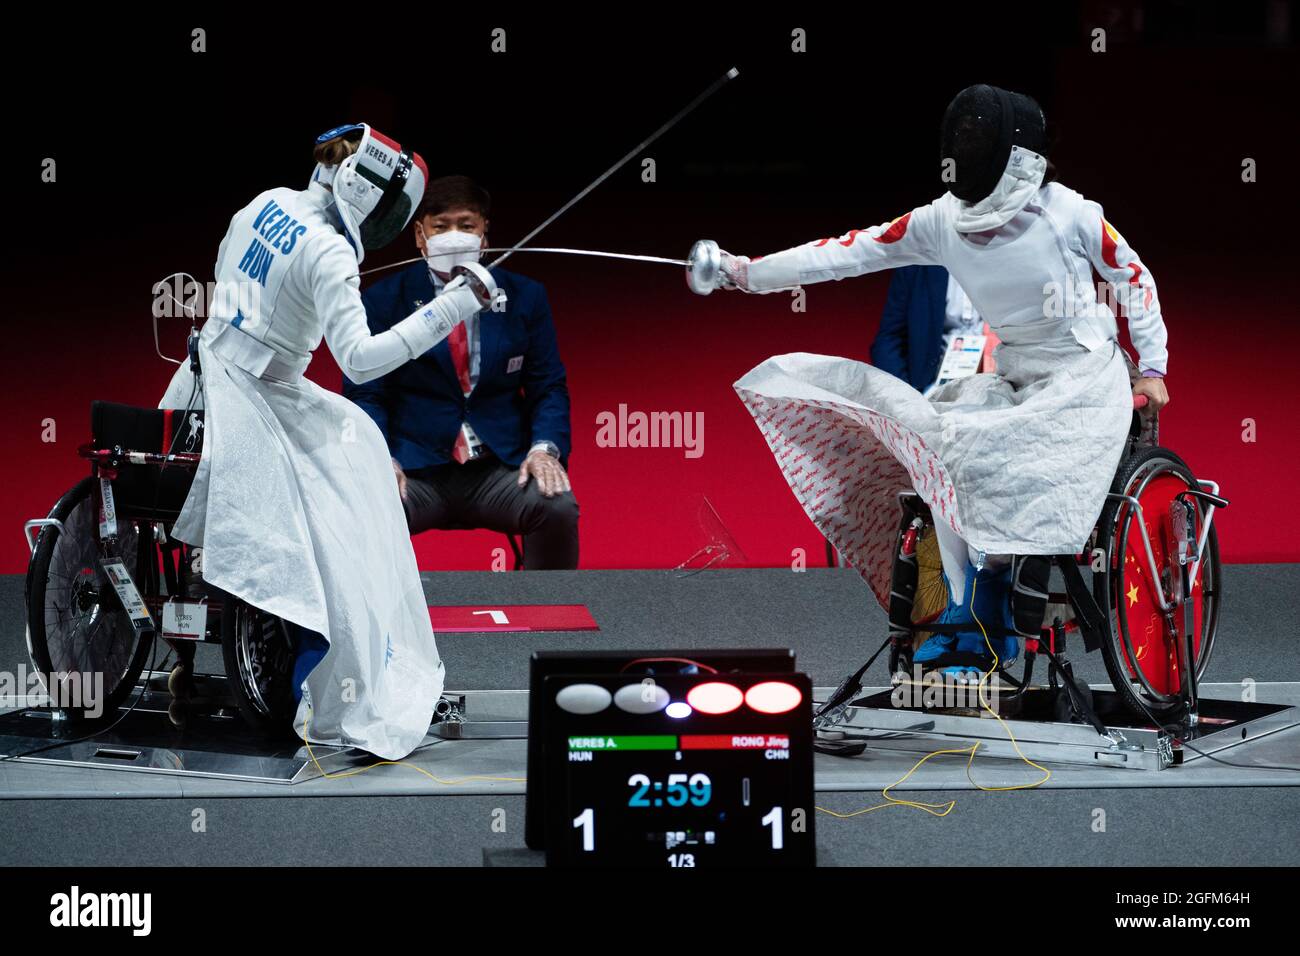 (210826) -- CHIBA, Aug. 26, 2021 (Xinhua) -- Rong Jing (R) of China competes against Amarilla Veres of Hungary during the wheelchair fencing women's epee individual Category A final at the Tokyo 2020 Paralympic Games in Chiba, Japan, Aug. 26, 2021. (Xinhua/Cheong Kam Ka) Stock Photo